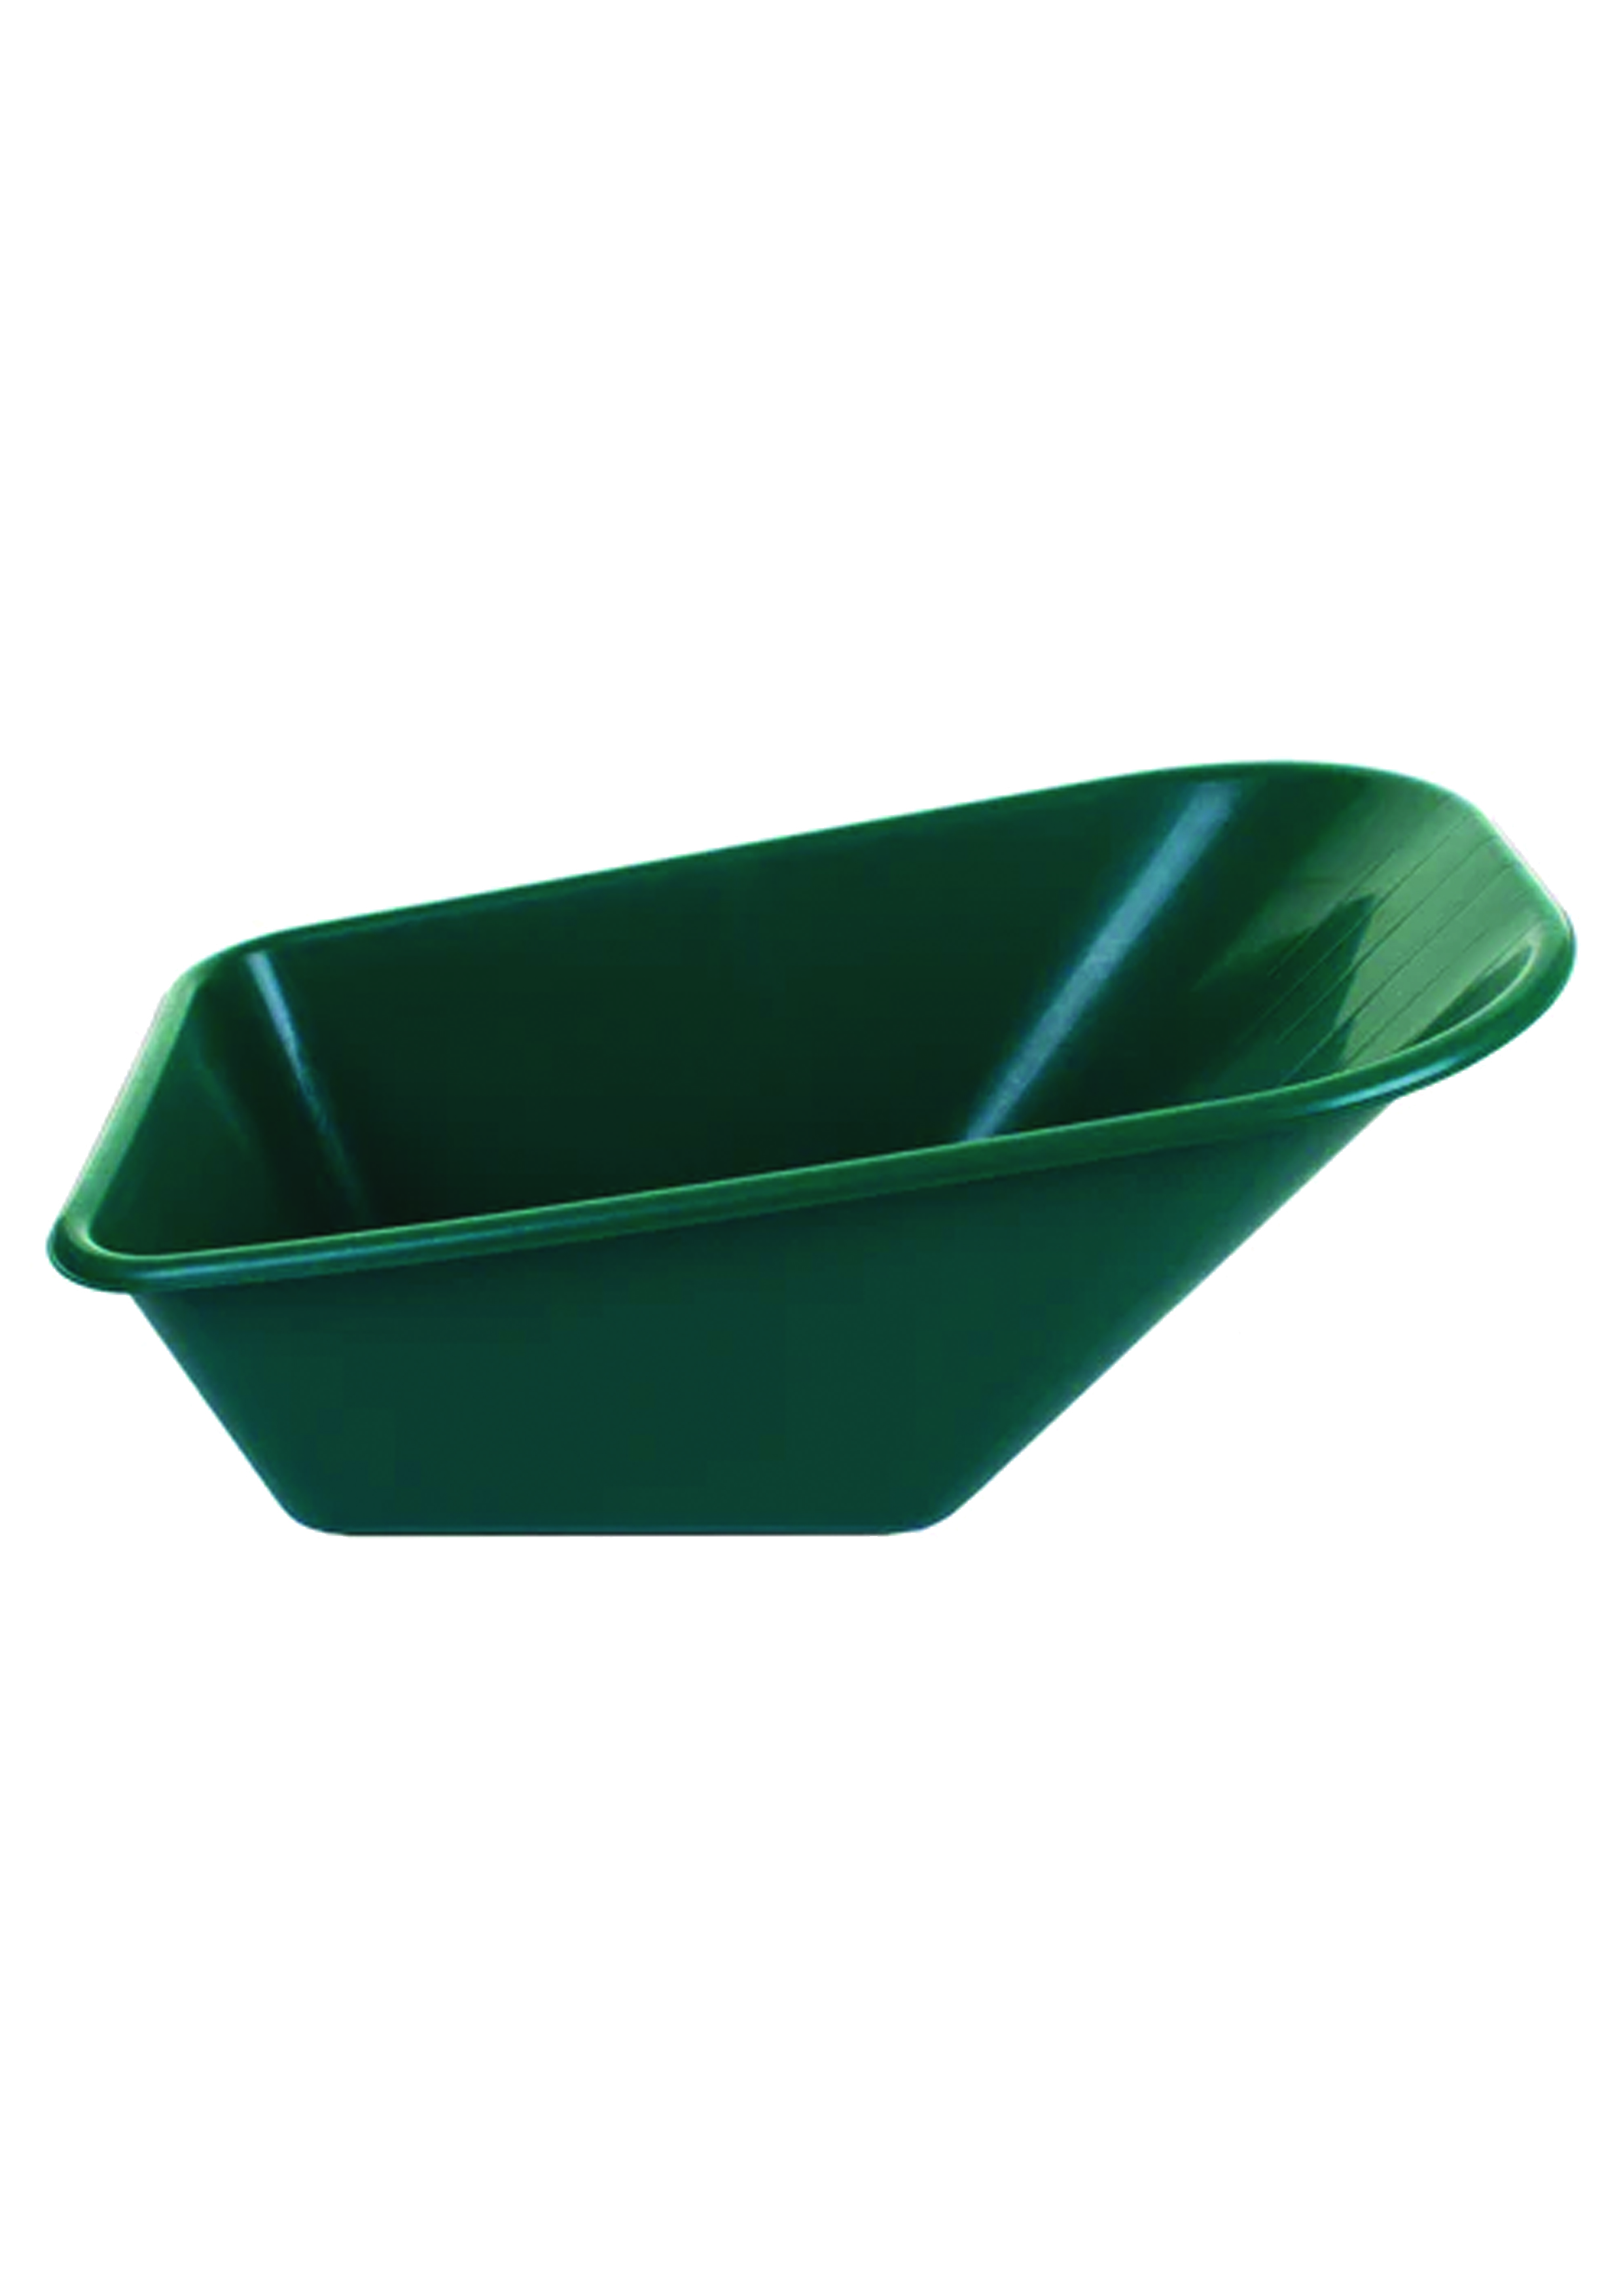 [GK120 Green Tray Only]